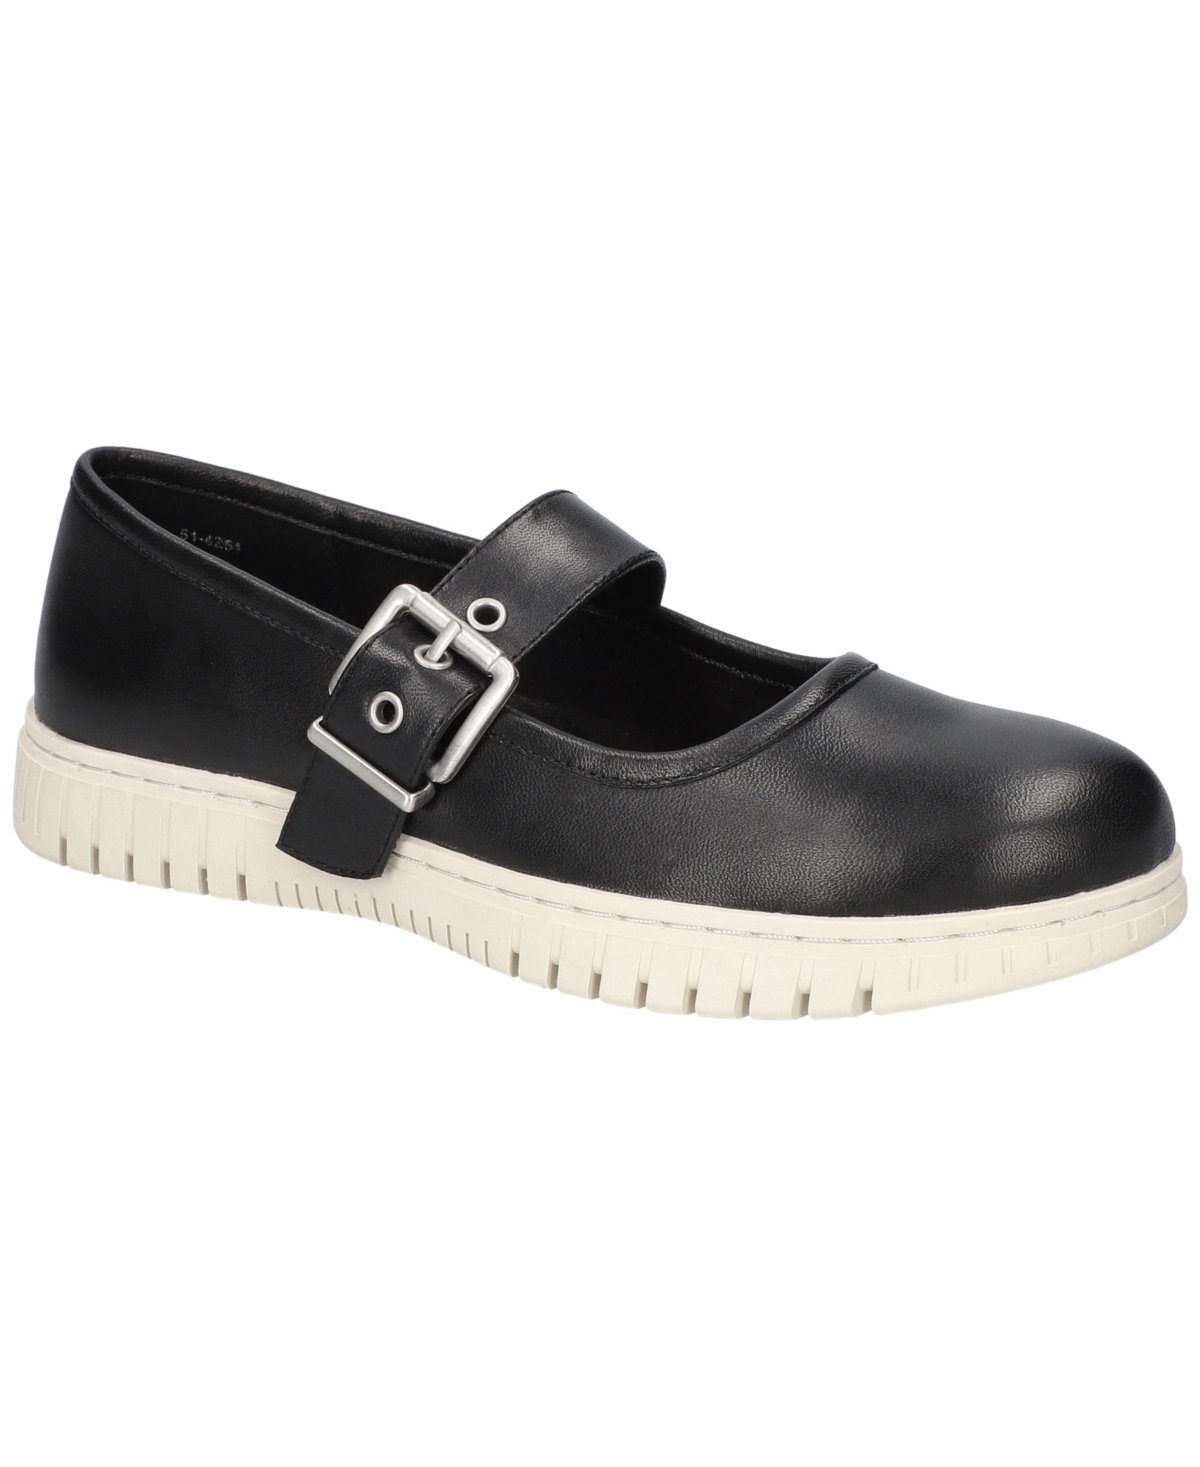 Women's Astro Mary Janes Round Toe Flats - Black Leather